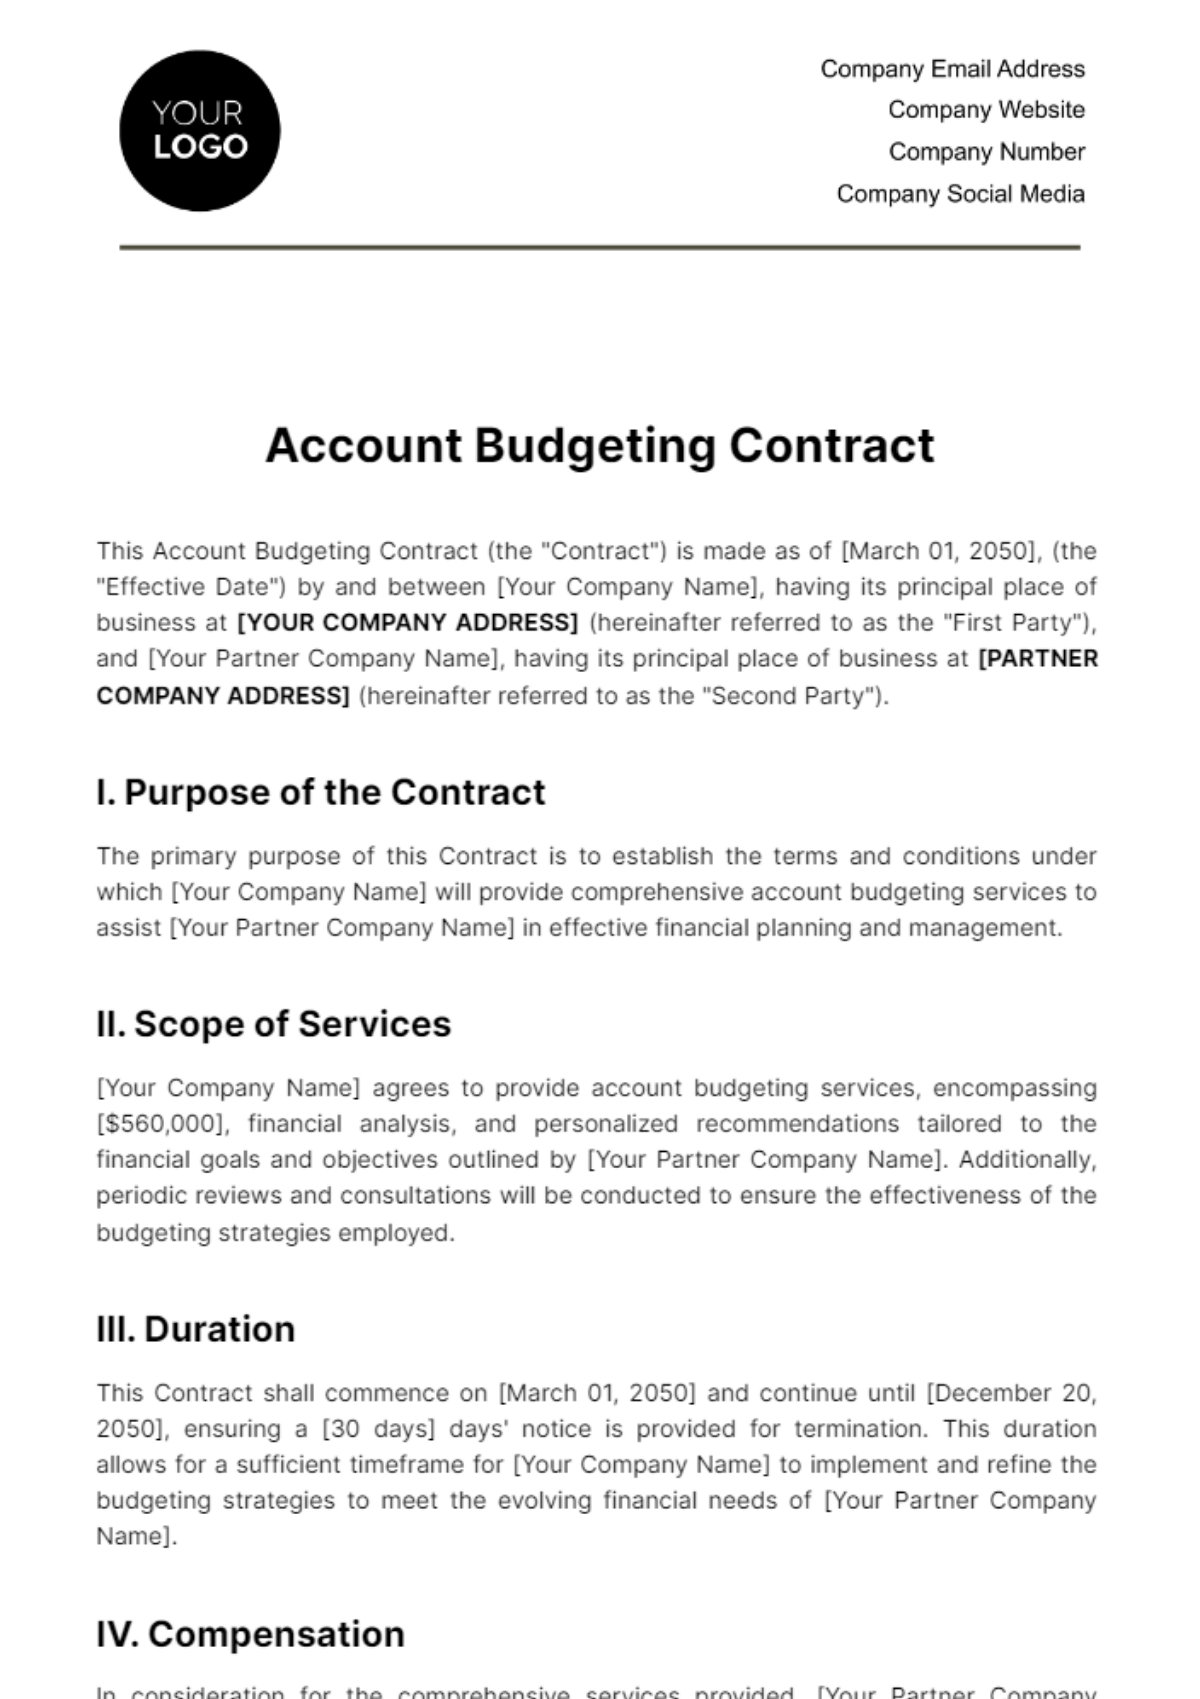 Account Budgeting Contract Template